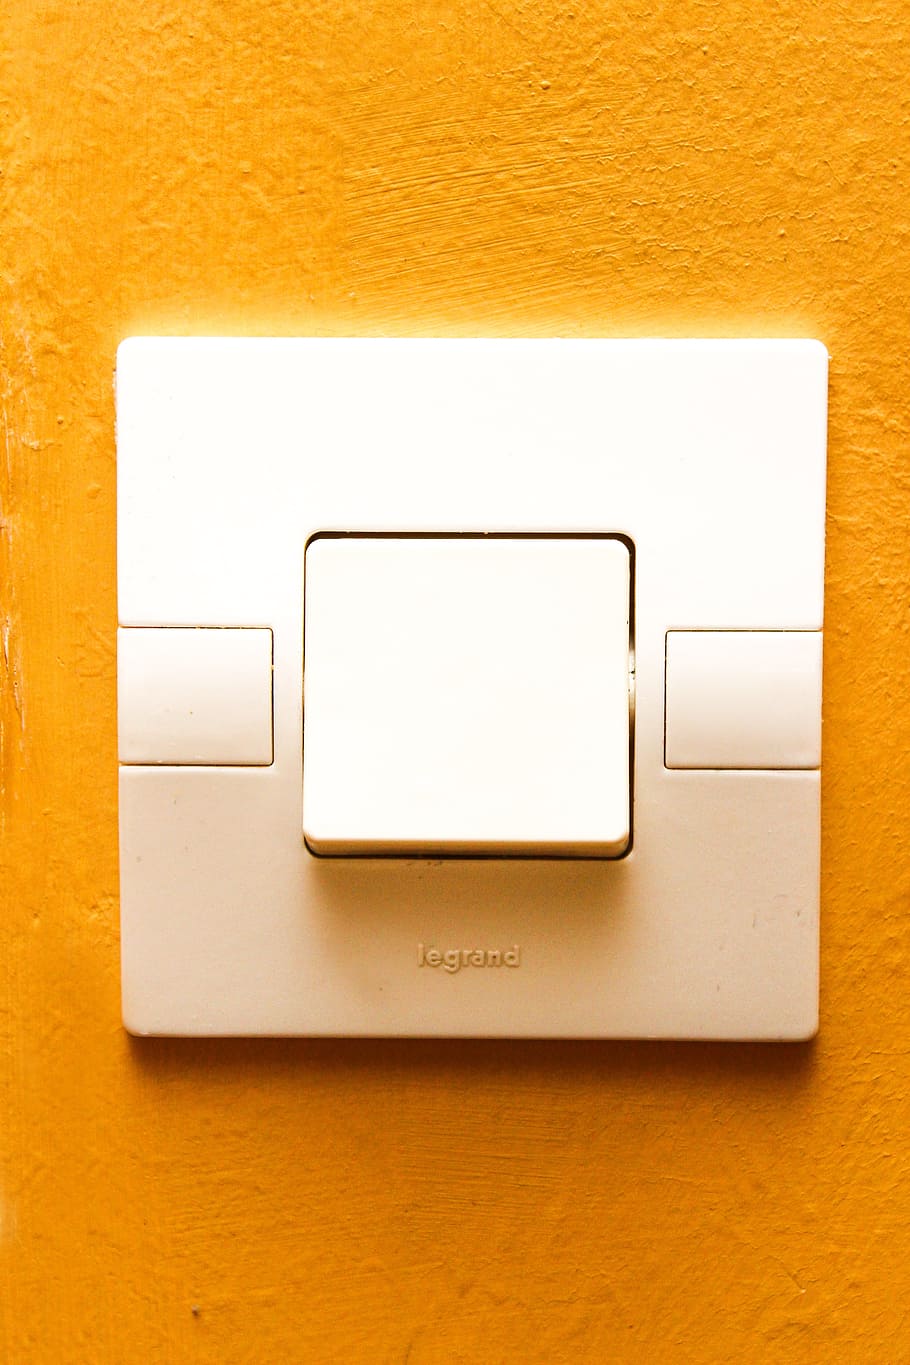 Light Switch, Great, White, Yellow, great, white, walls, light, electricity, switch, technology